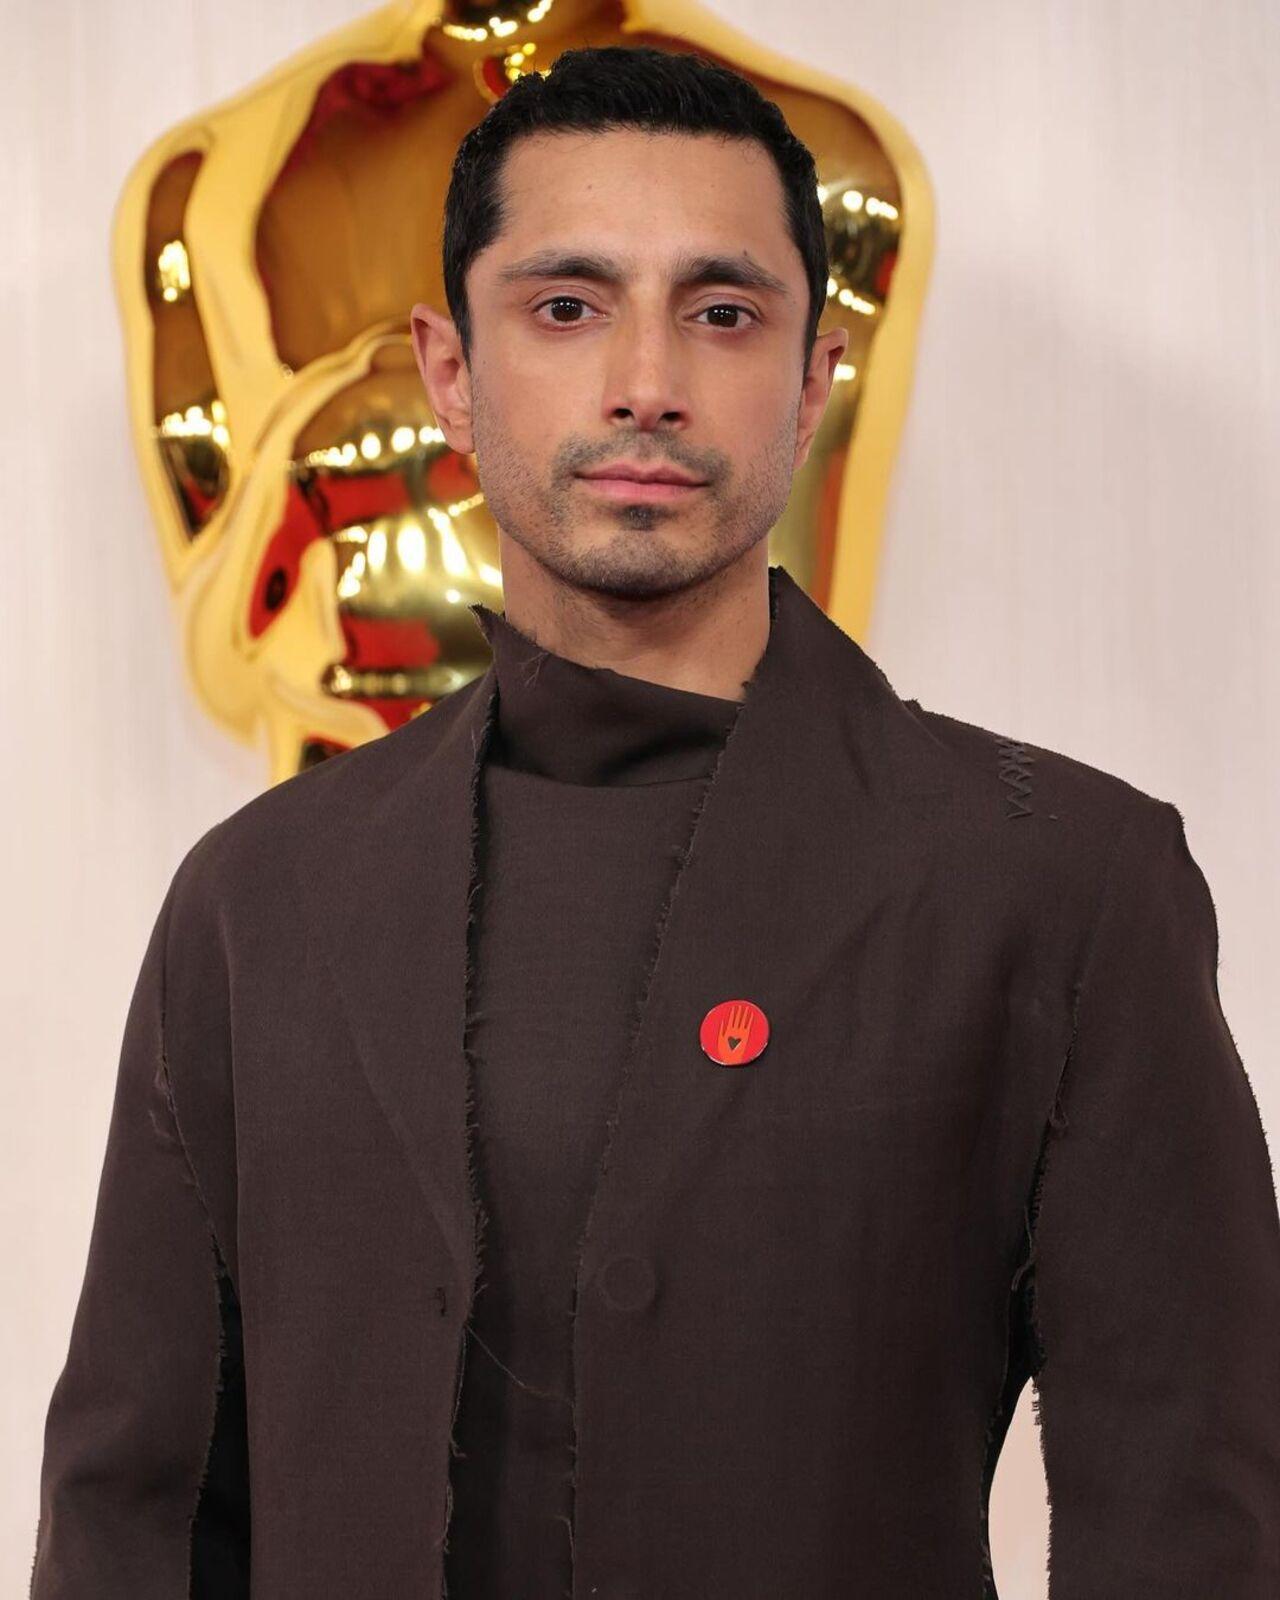 British actor and rapper Riz Ahmed of South Asian origin looked sharp in this suit as he attended the ceremony. He was also seen wearing the red lapel pin in support of Palestine and pro Gaza ceasefire